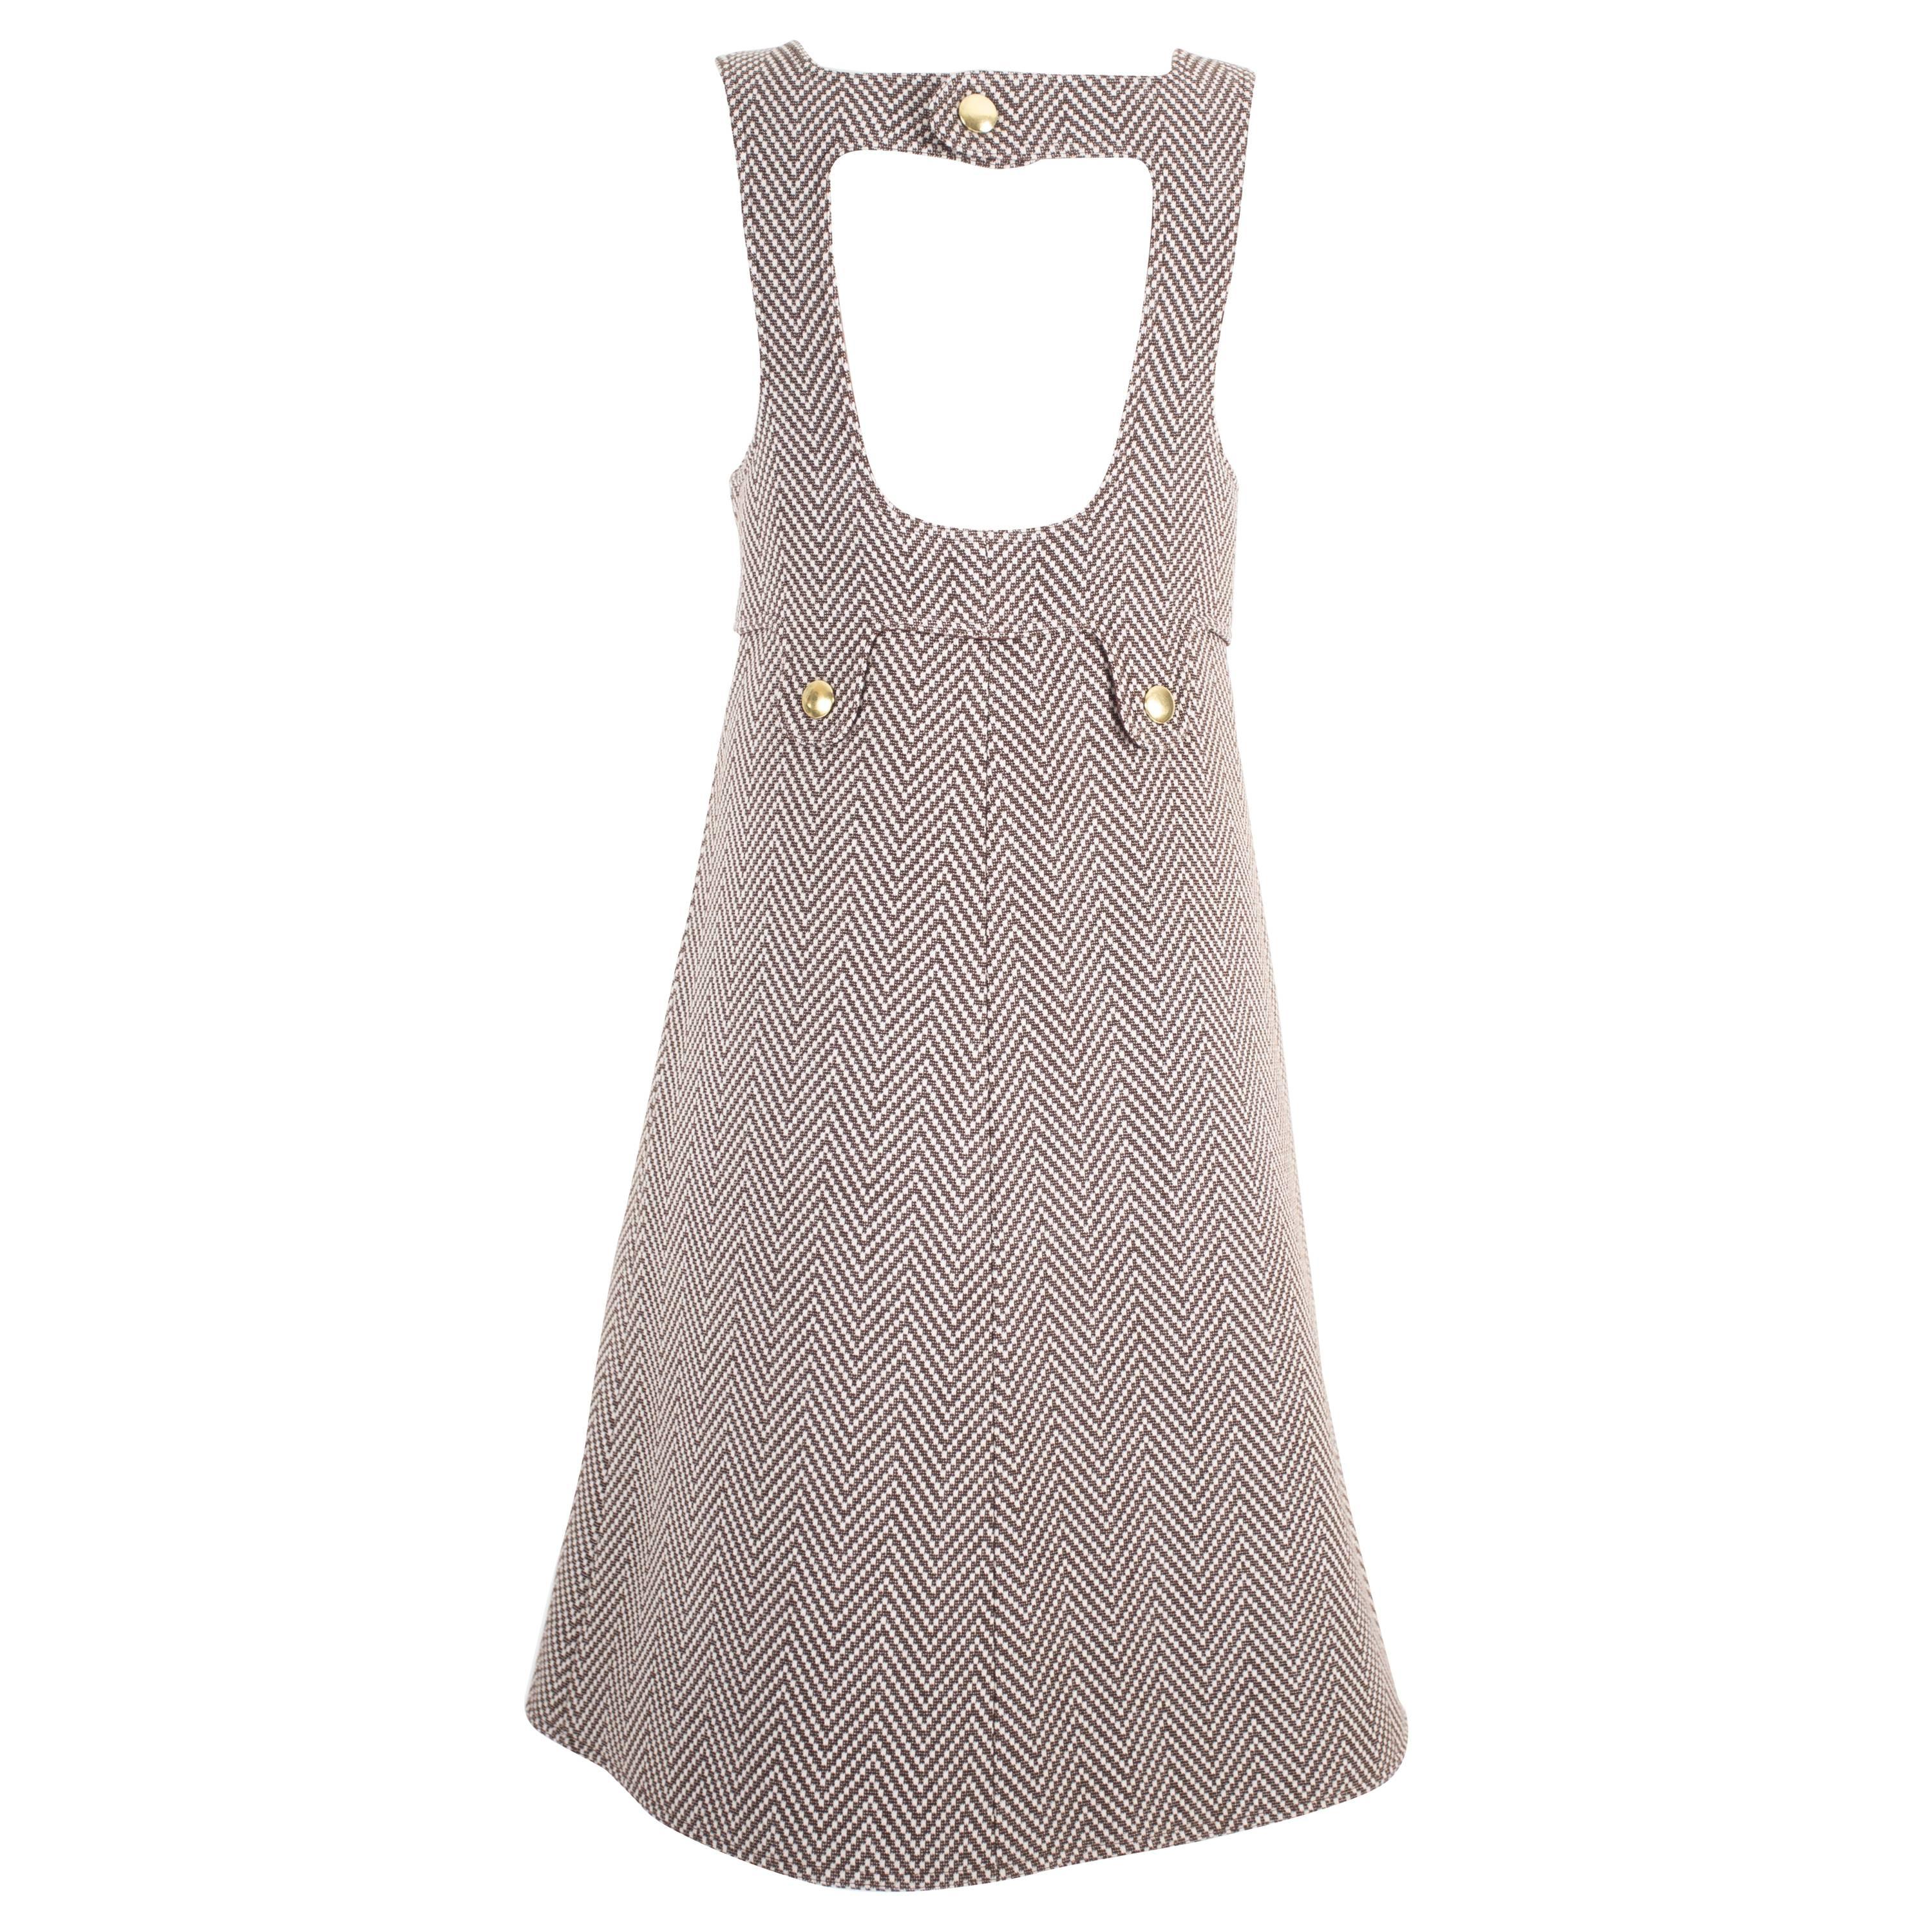 Courreges Haute Couture tweed pinafore dress, circa 1969